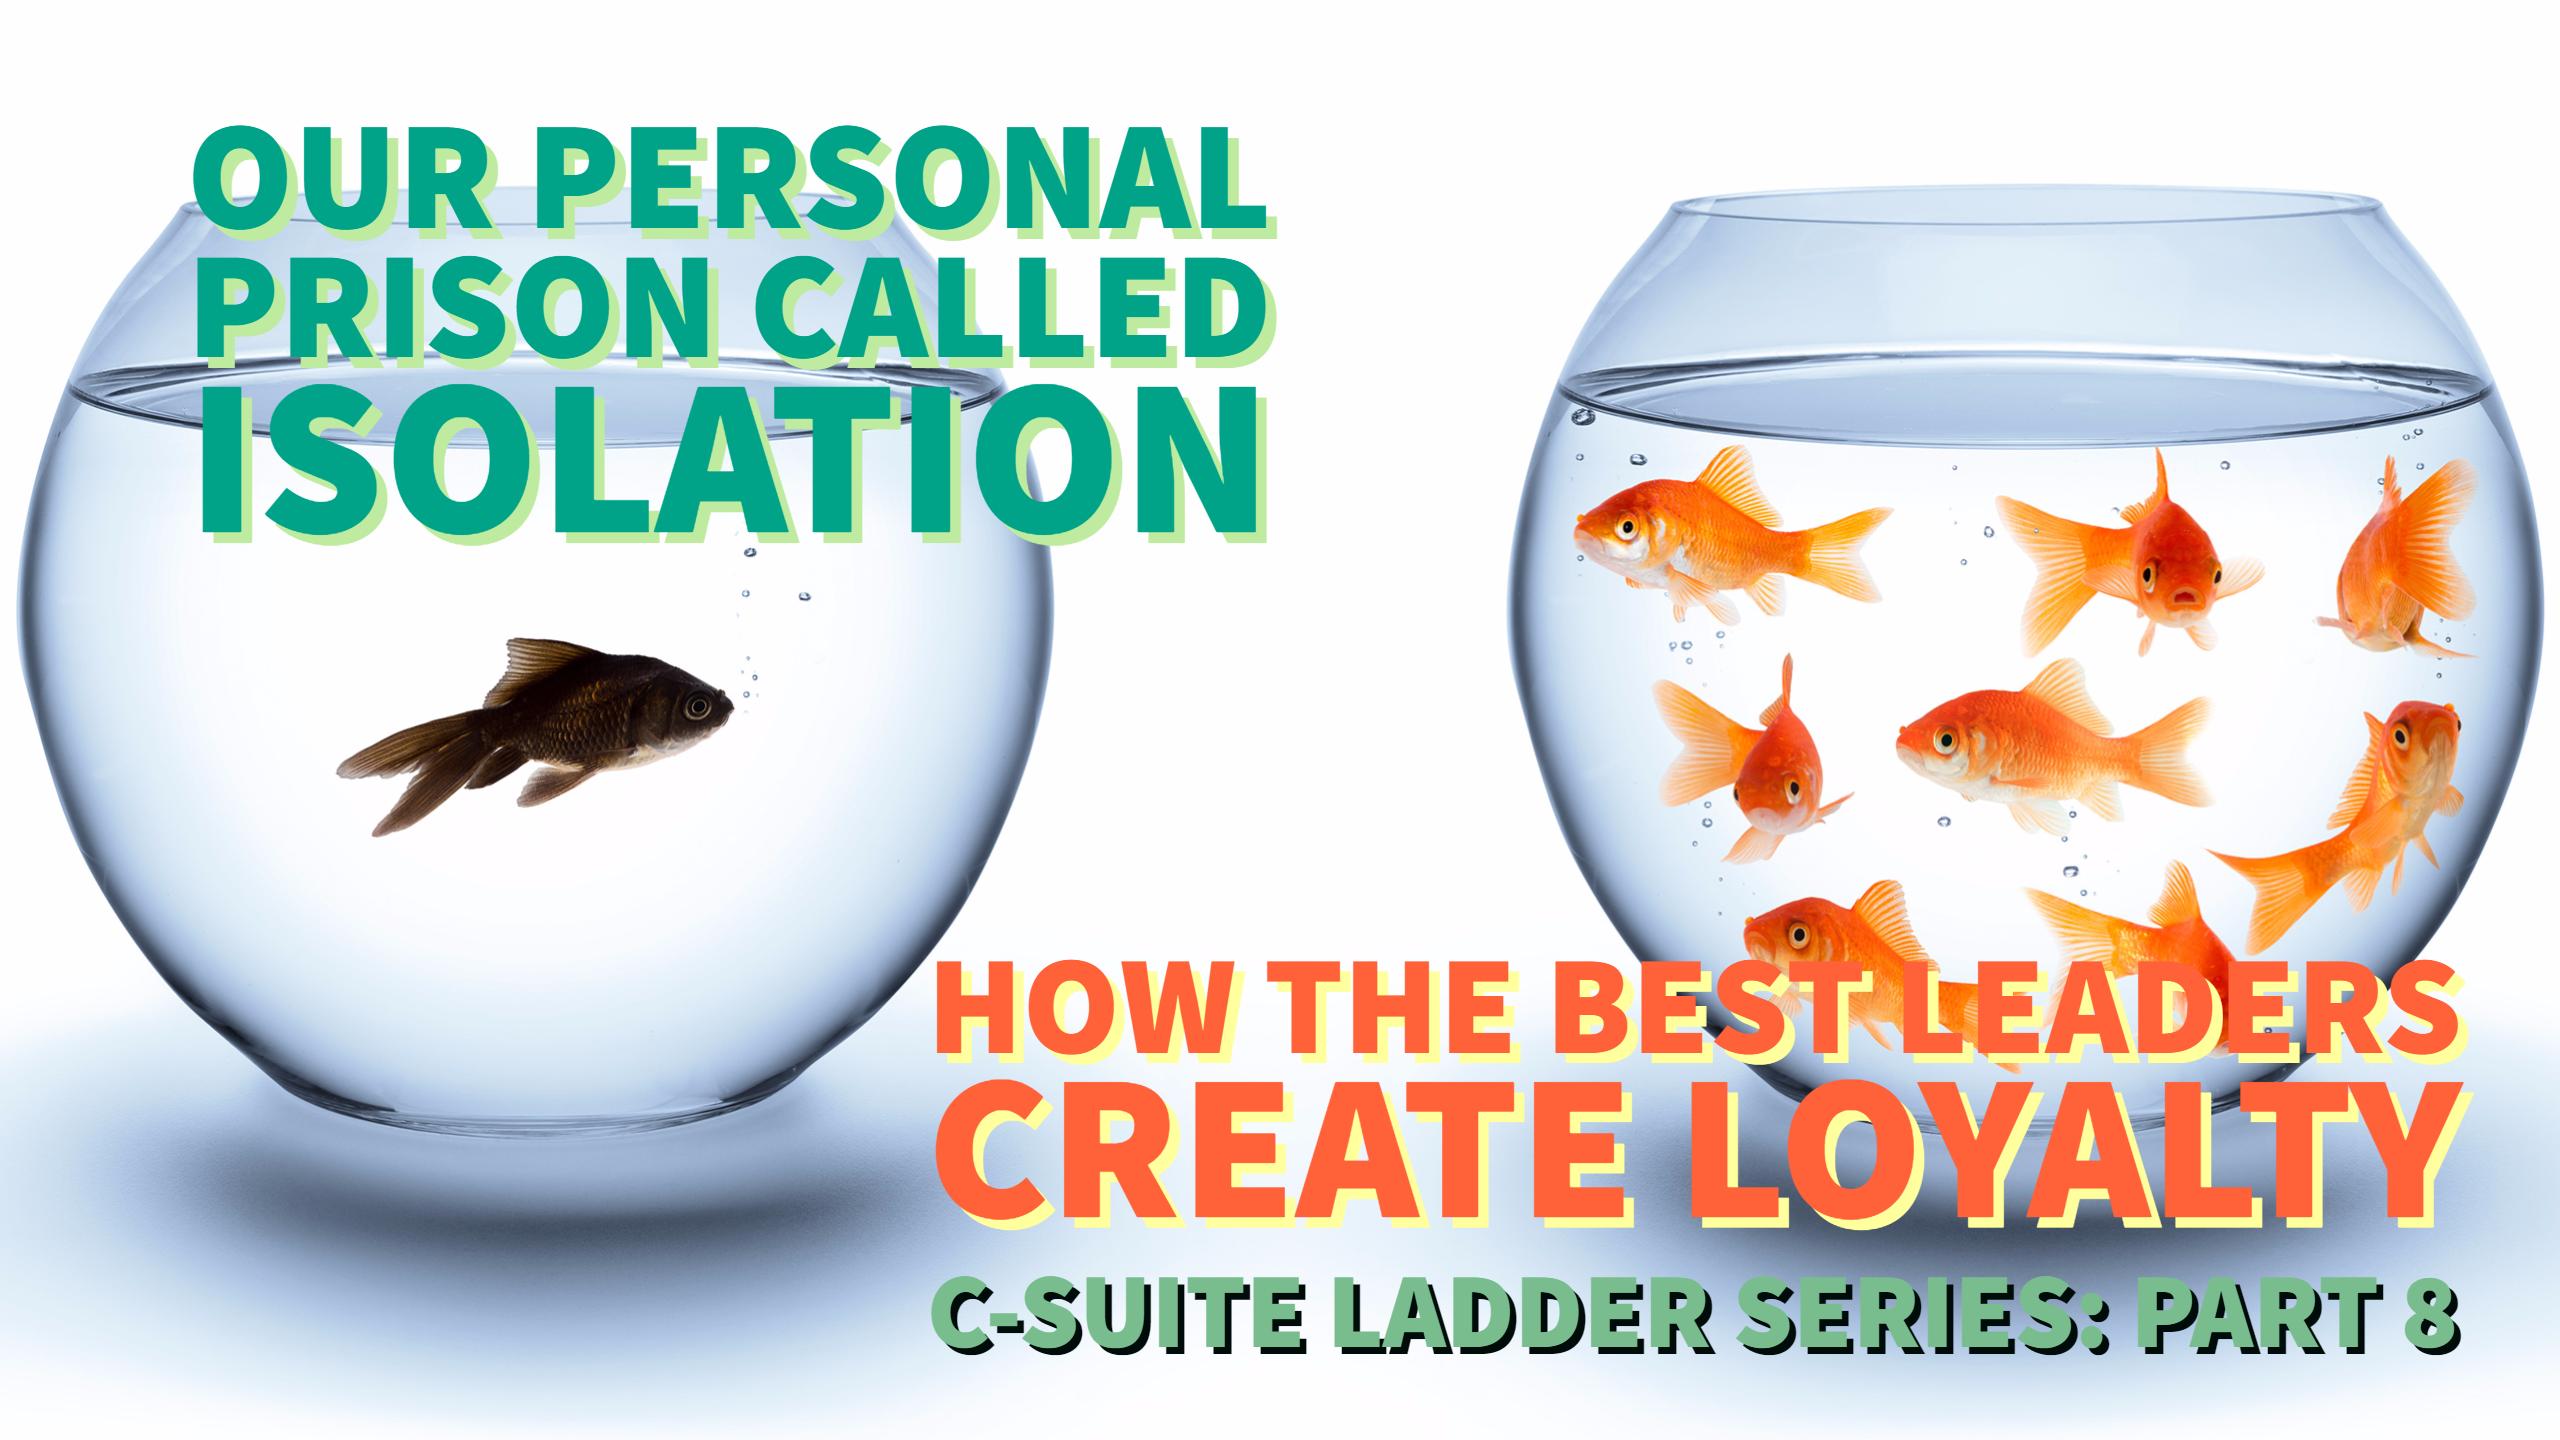 8 - How The Best Leaders Create Loyalty